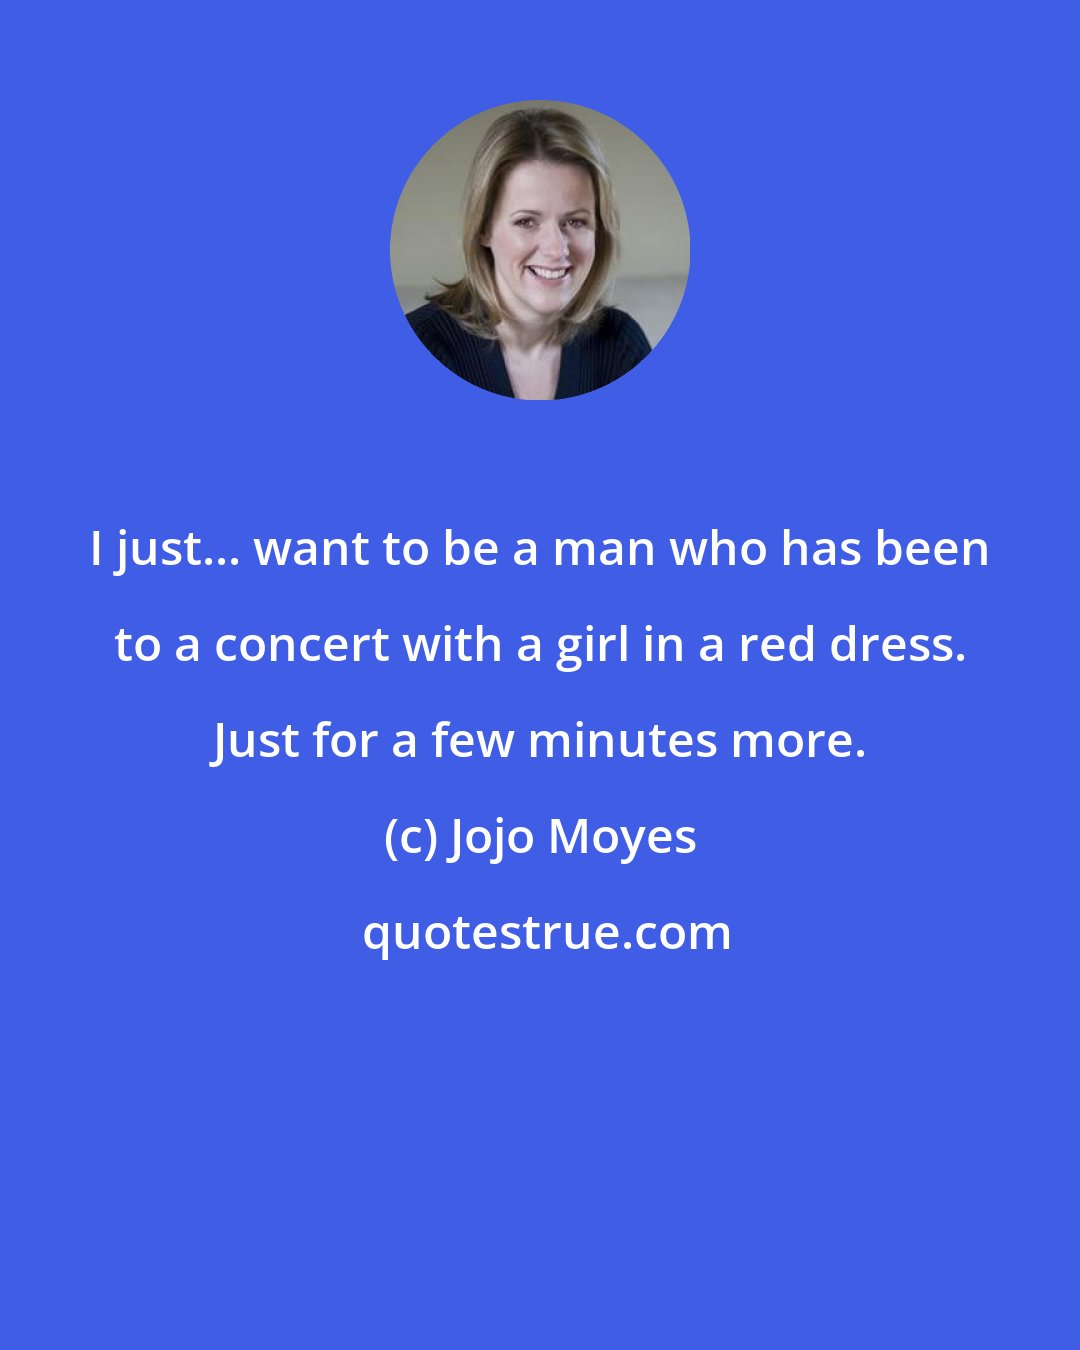 Jojo Moyes: I just... want to be a man who has been to a concert with a girl in a red dress. Just for a few minutes more.